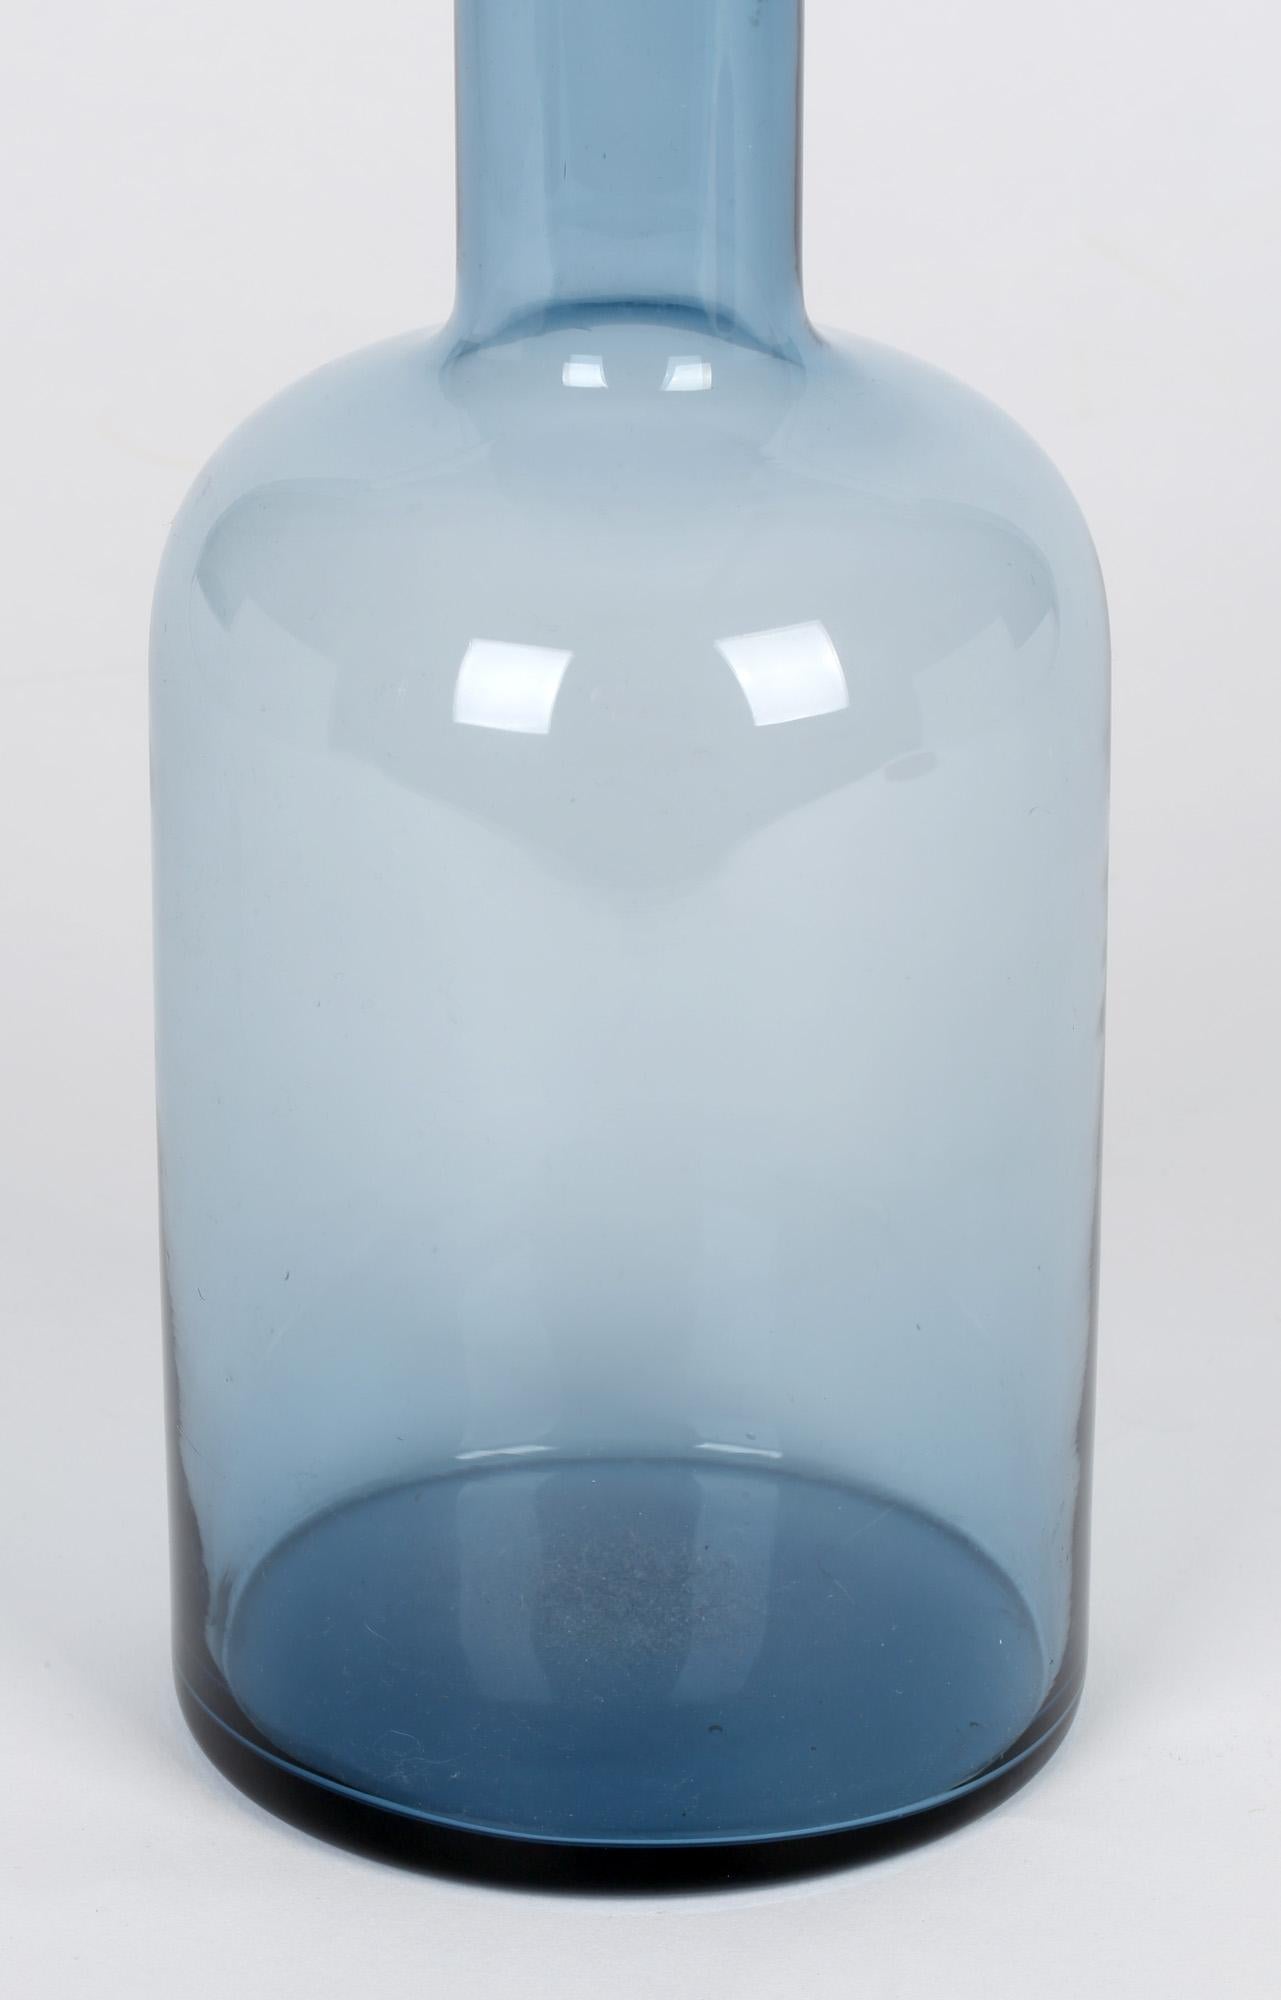 A stylish Danish art glass Gulvase designed by Otto Brauer for Kastrup Holmegaard in the 1960's. The vase made in light blue tinted glass has a cylindrical shaped body tall slender neck and a flat folded back top. The vase one of the most iconic and